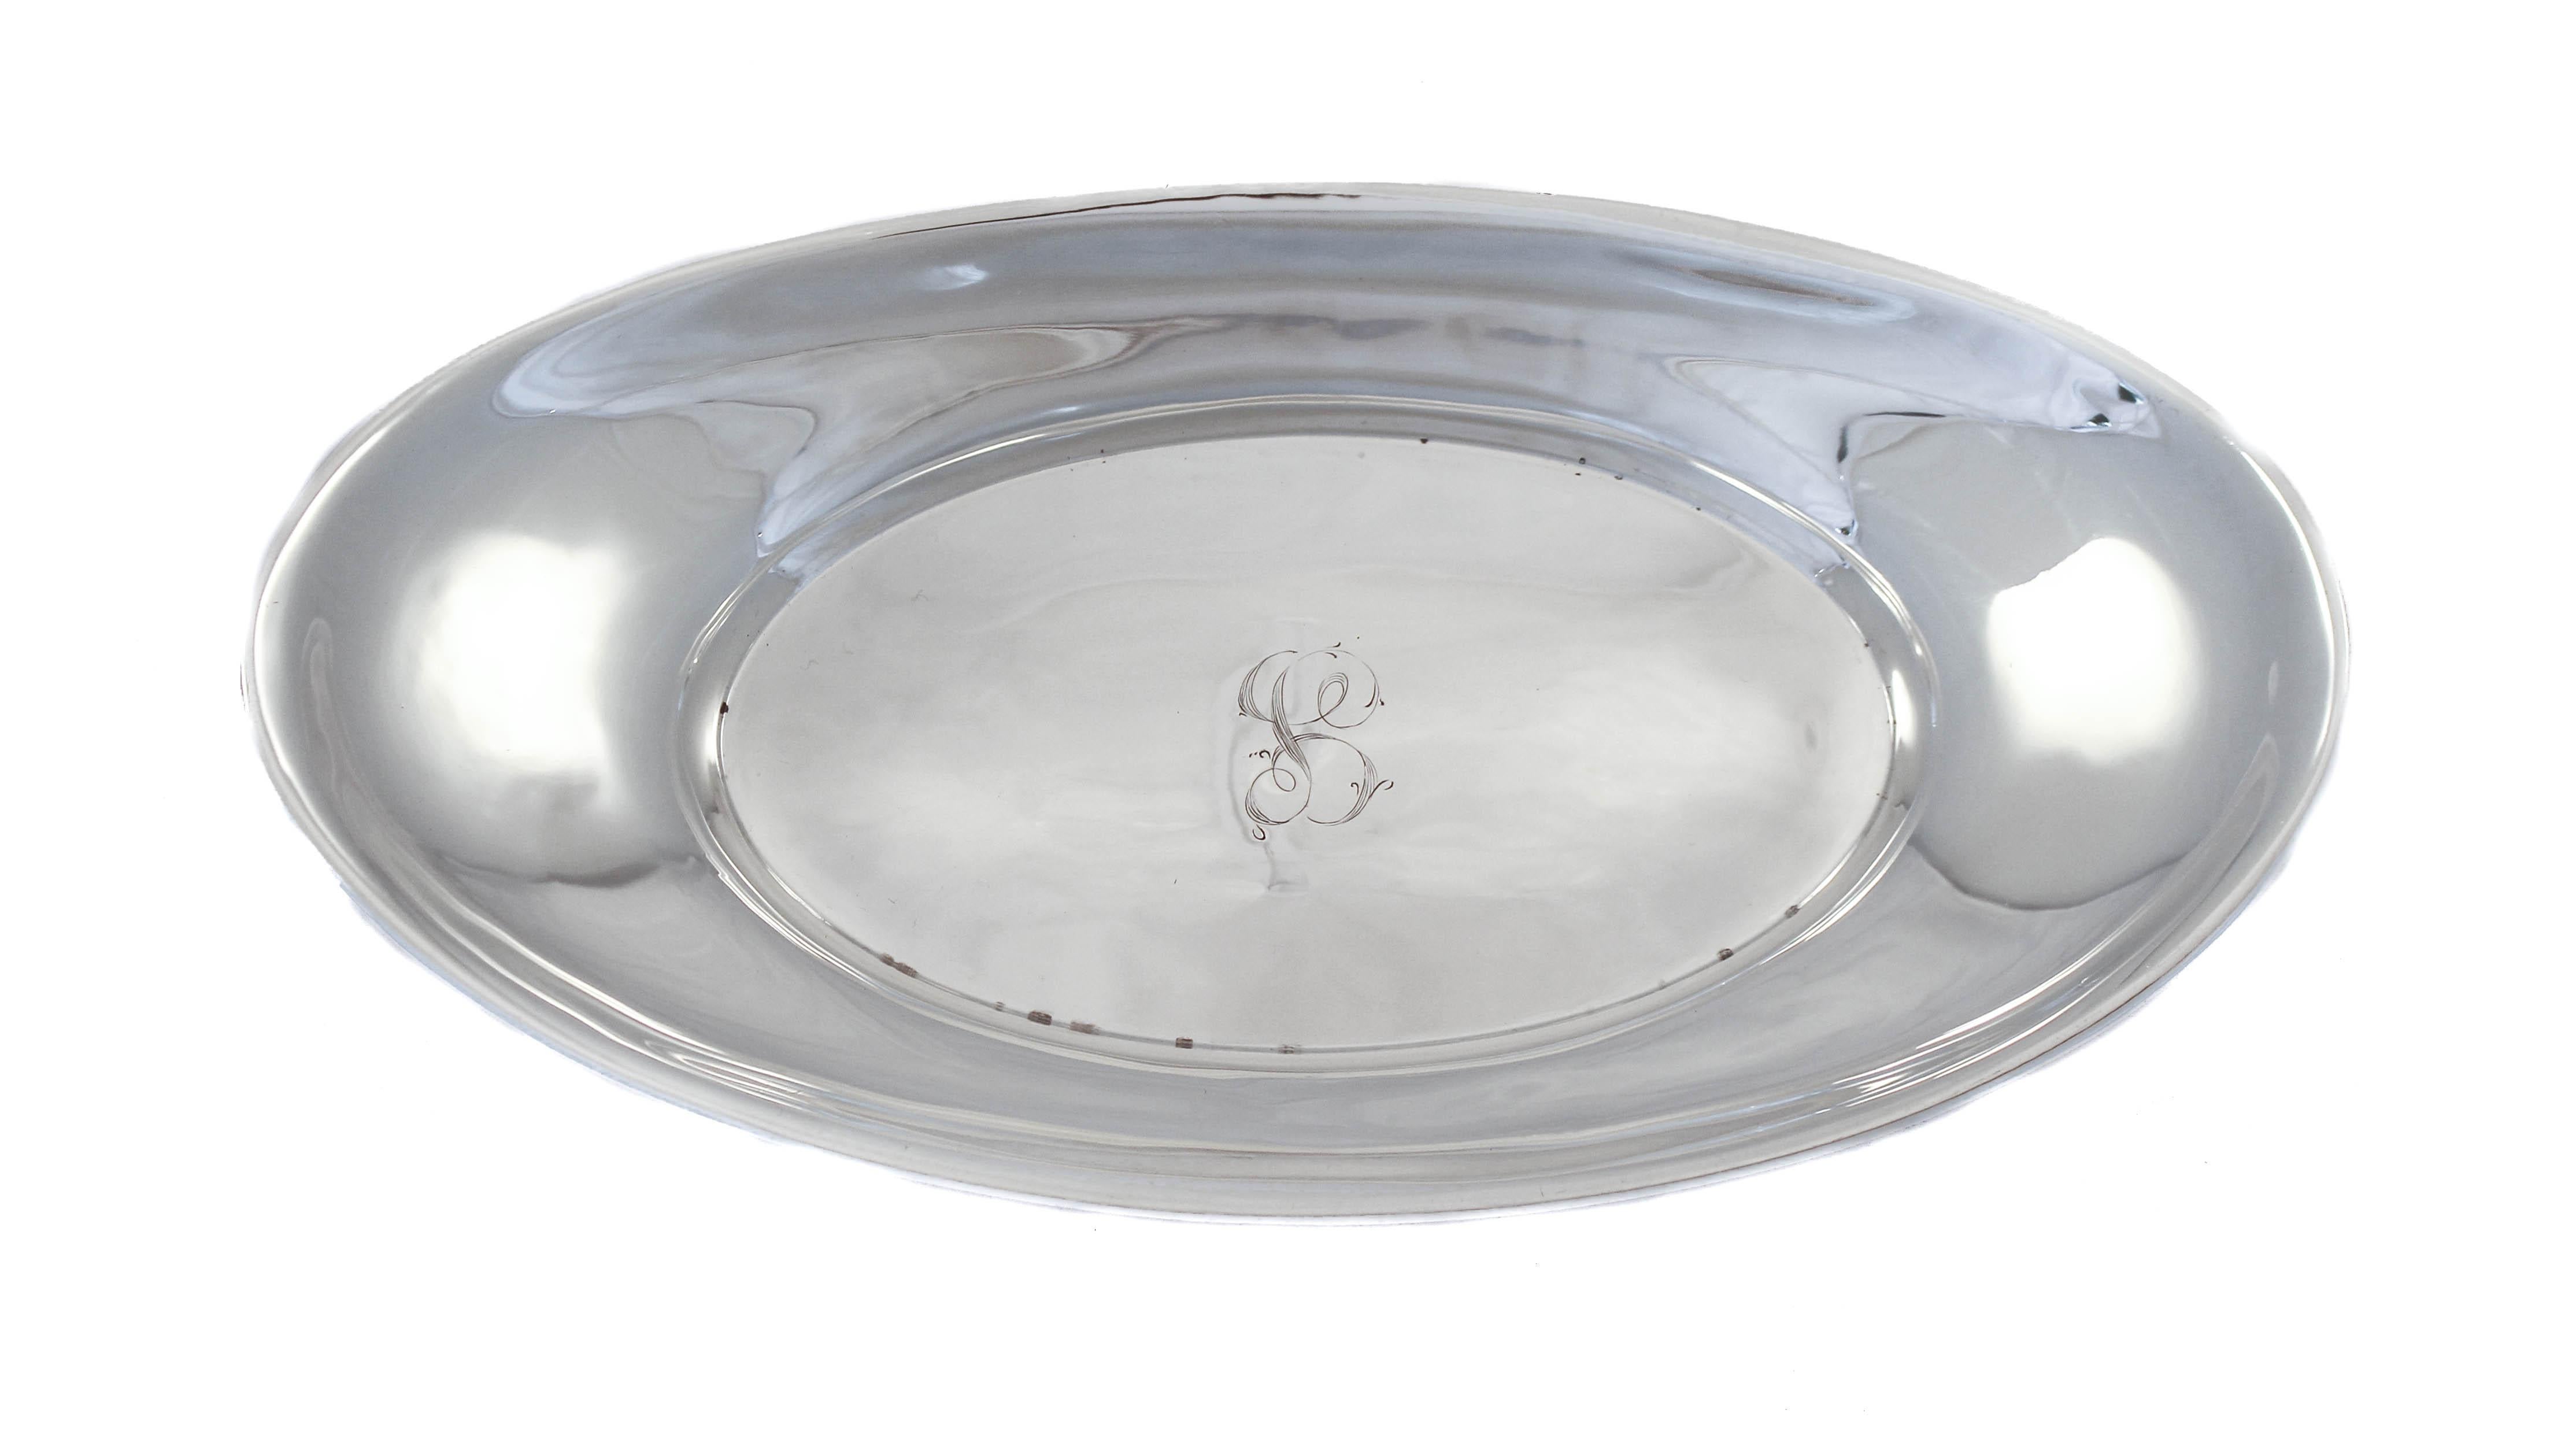 We are delighted to offer this sterling silver breadbasket by Mount Vernon Silver Company of Mt. Vernon, New York. 
During WWII very little sterling silver hollowware was being manufactured. Partly because there was a shortage of manpower but